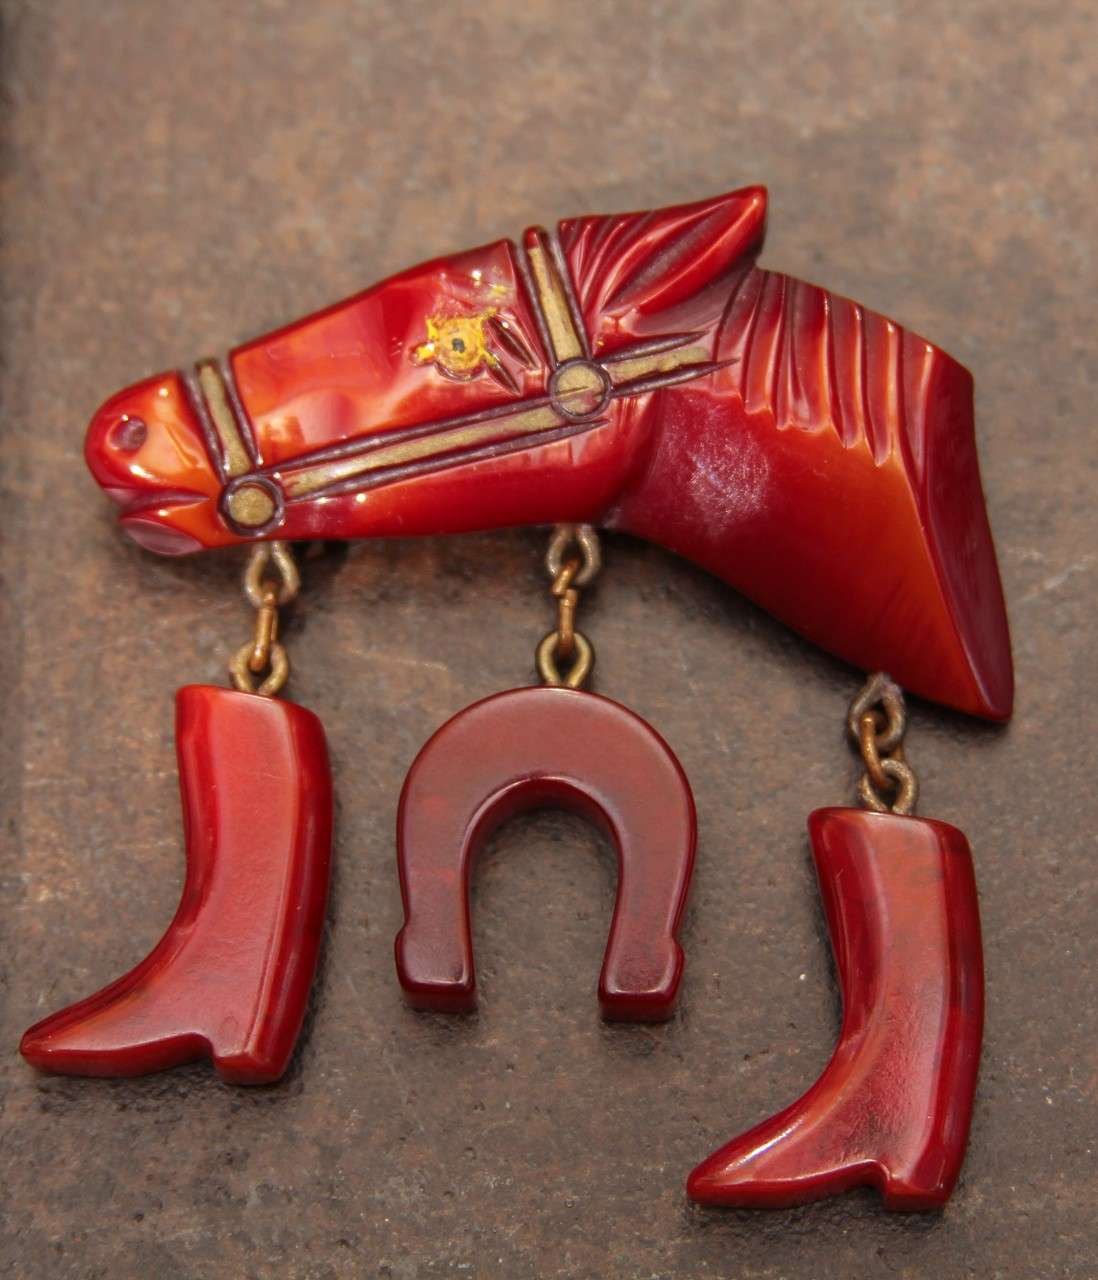 bakelite horse pin with pair of boots and horseshoe for luck